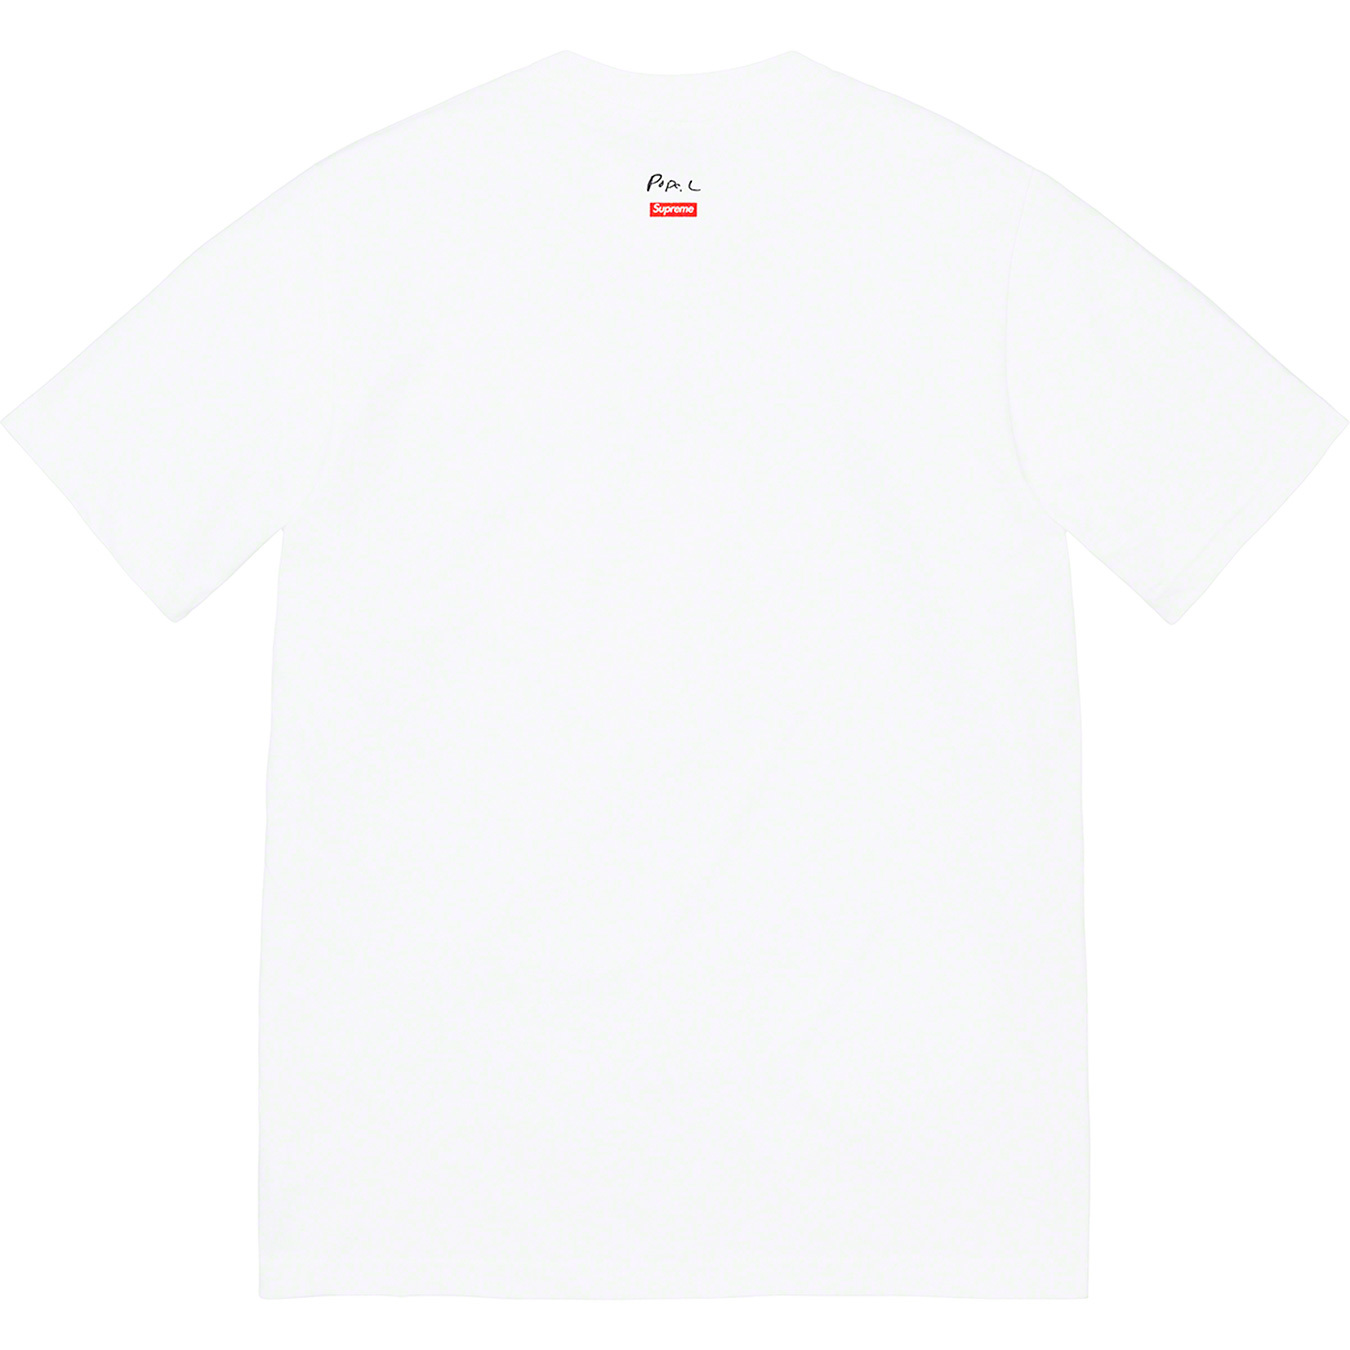 Supreme/Pope.L Great White Way Tee